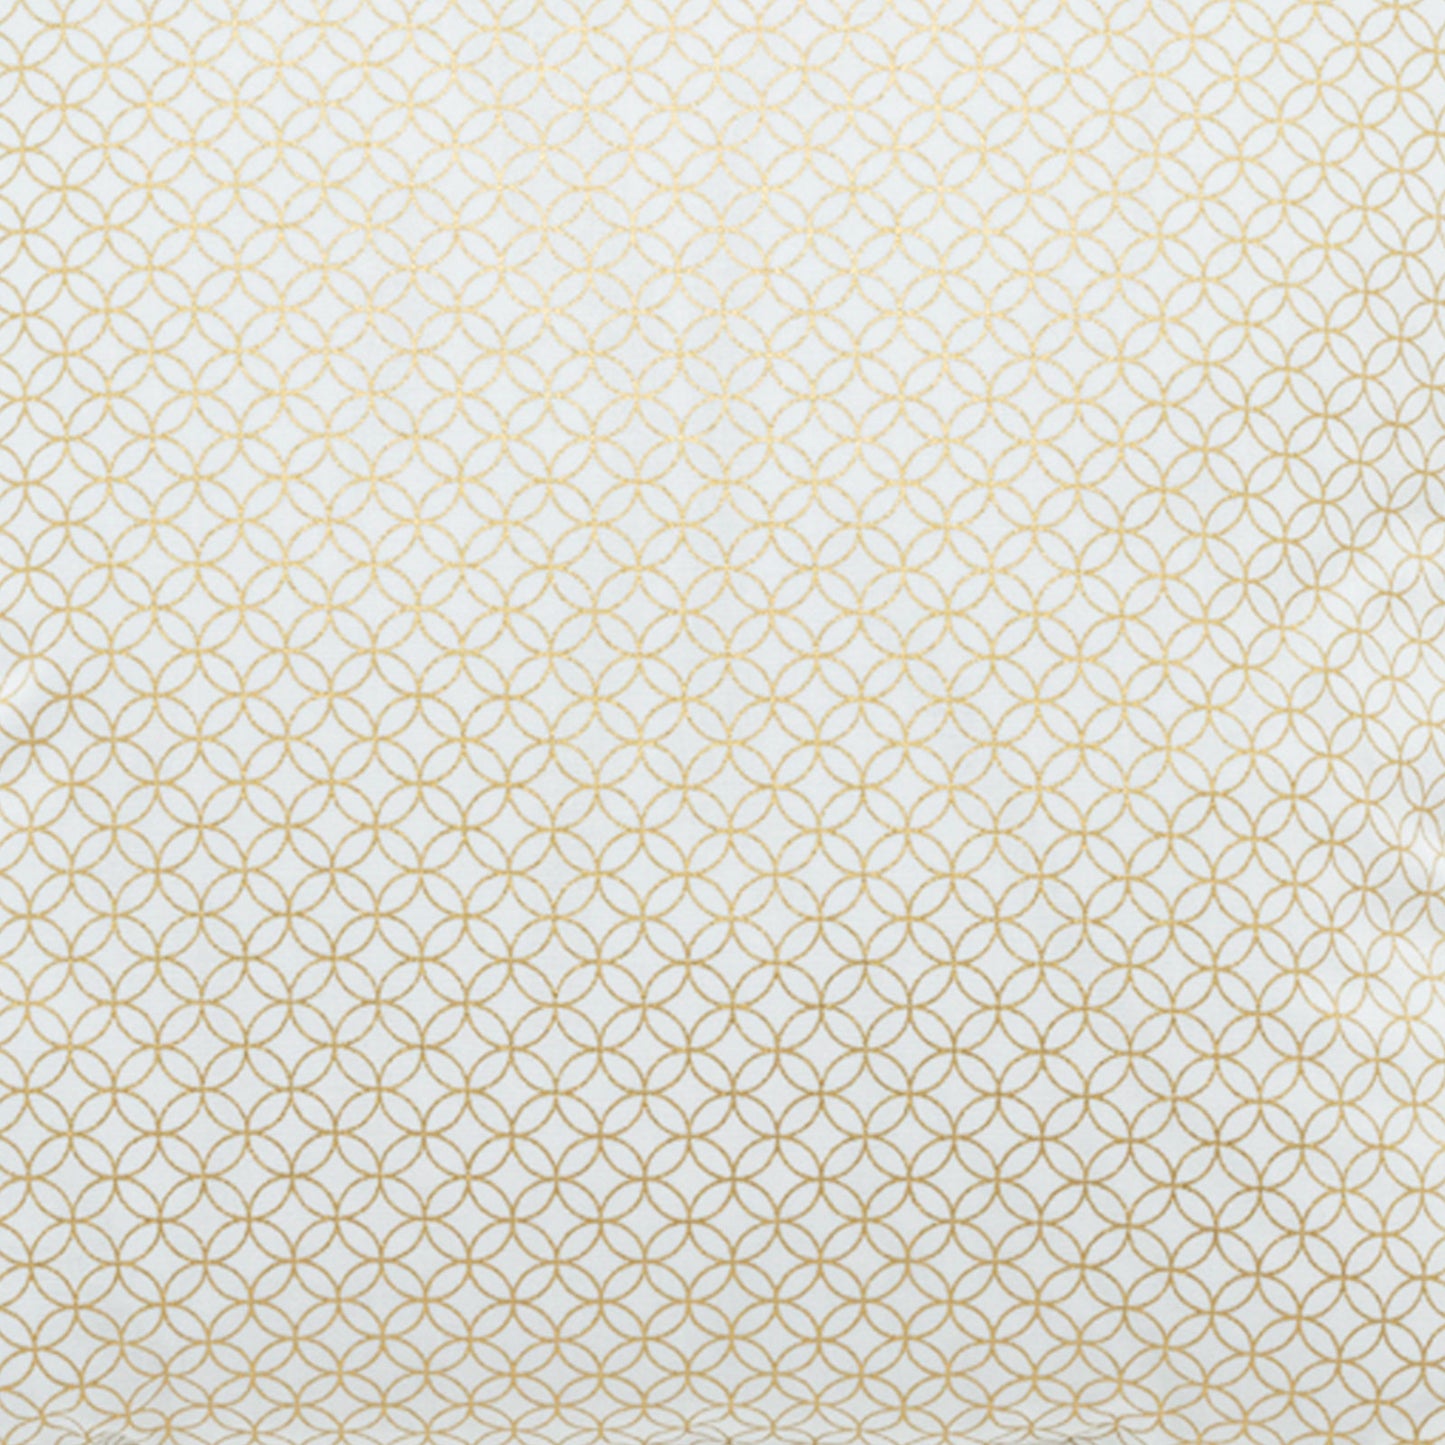 Imported Japanese Fabric - Shippo Gold Sparkle_Fabric_Imported from Japan_100% Cotton_Japanese Sleep System